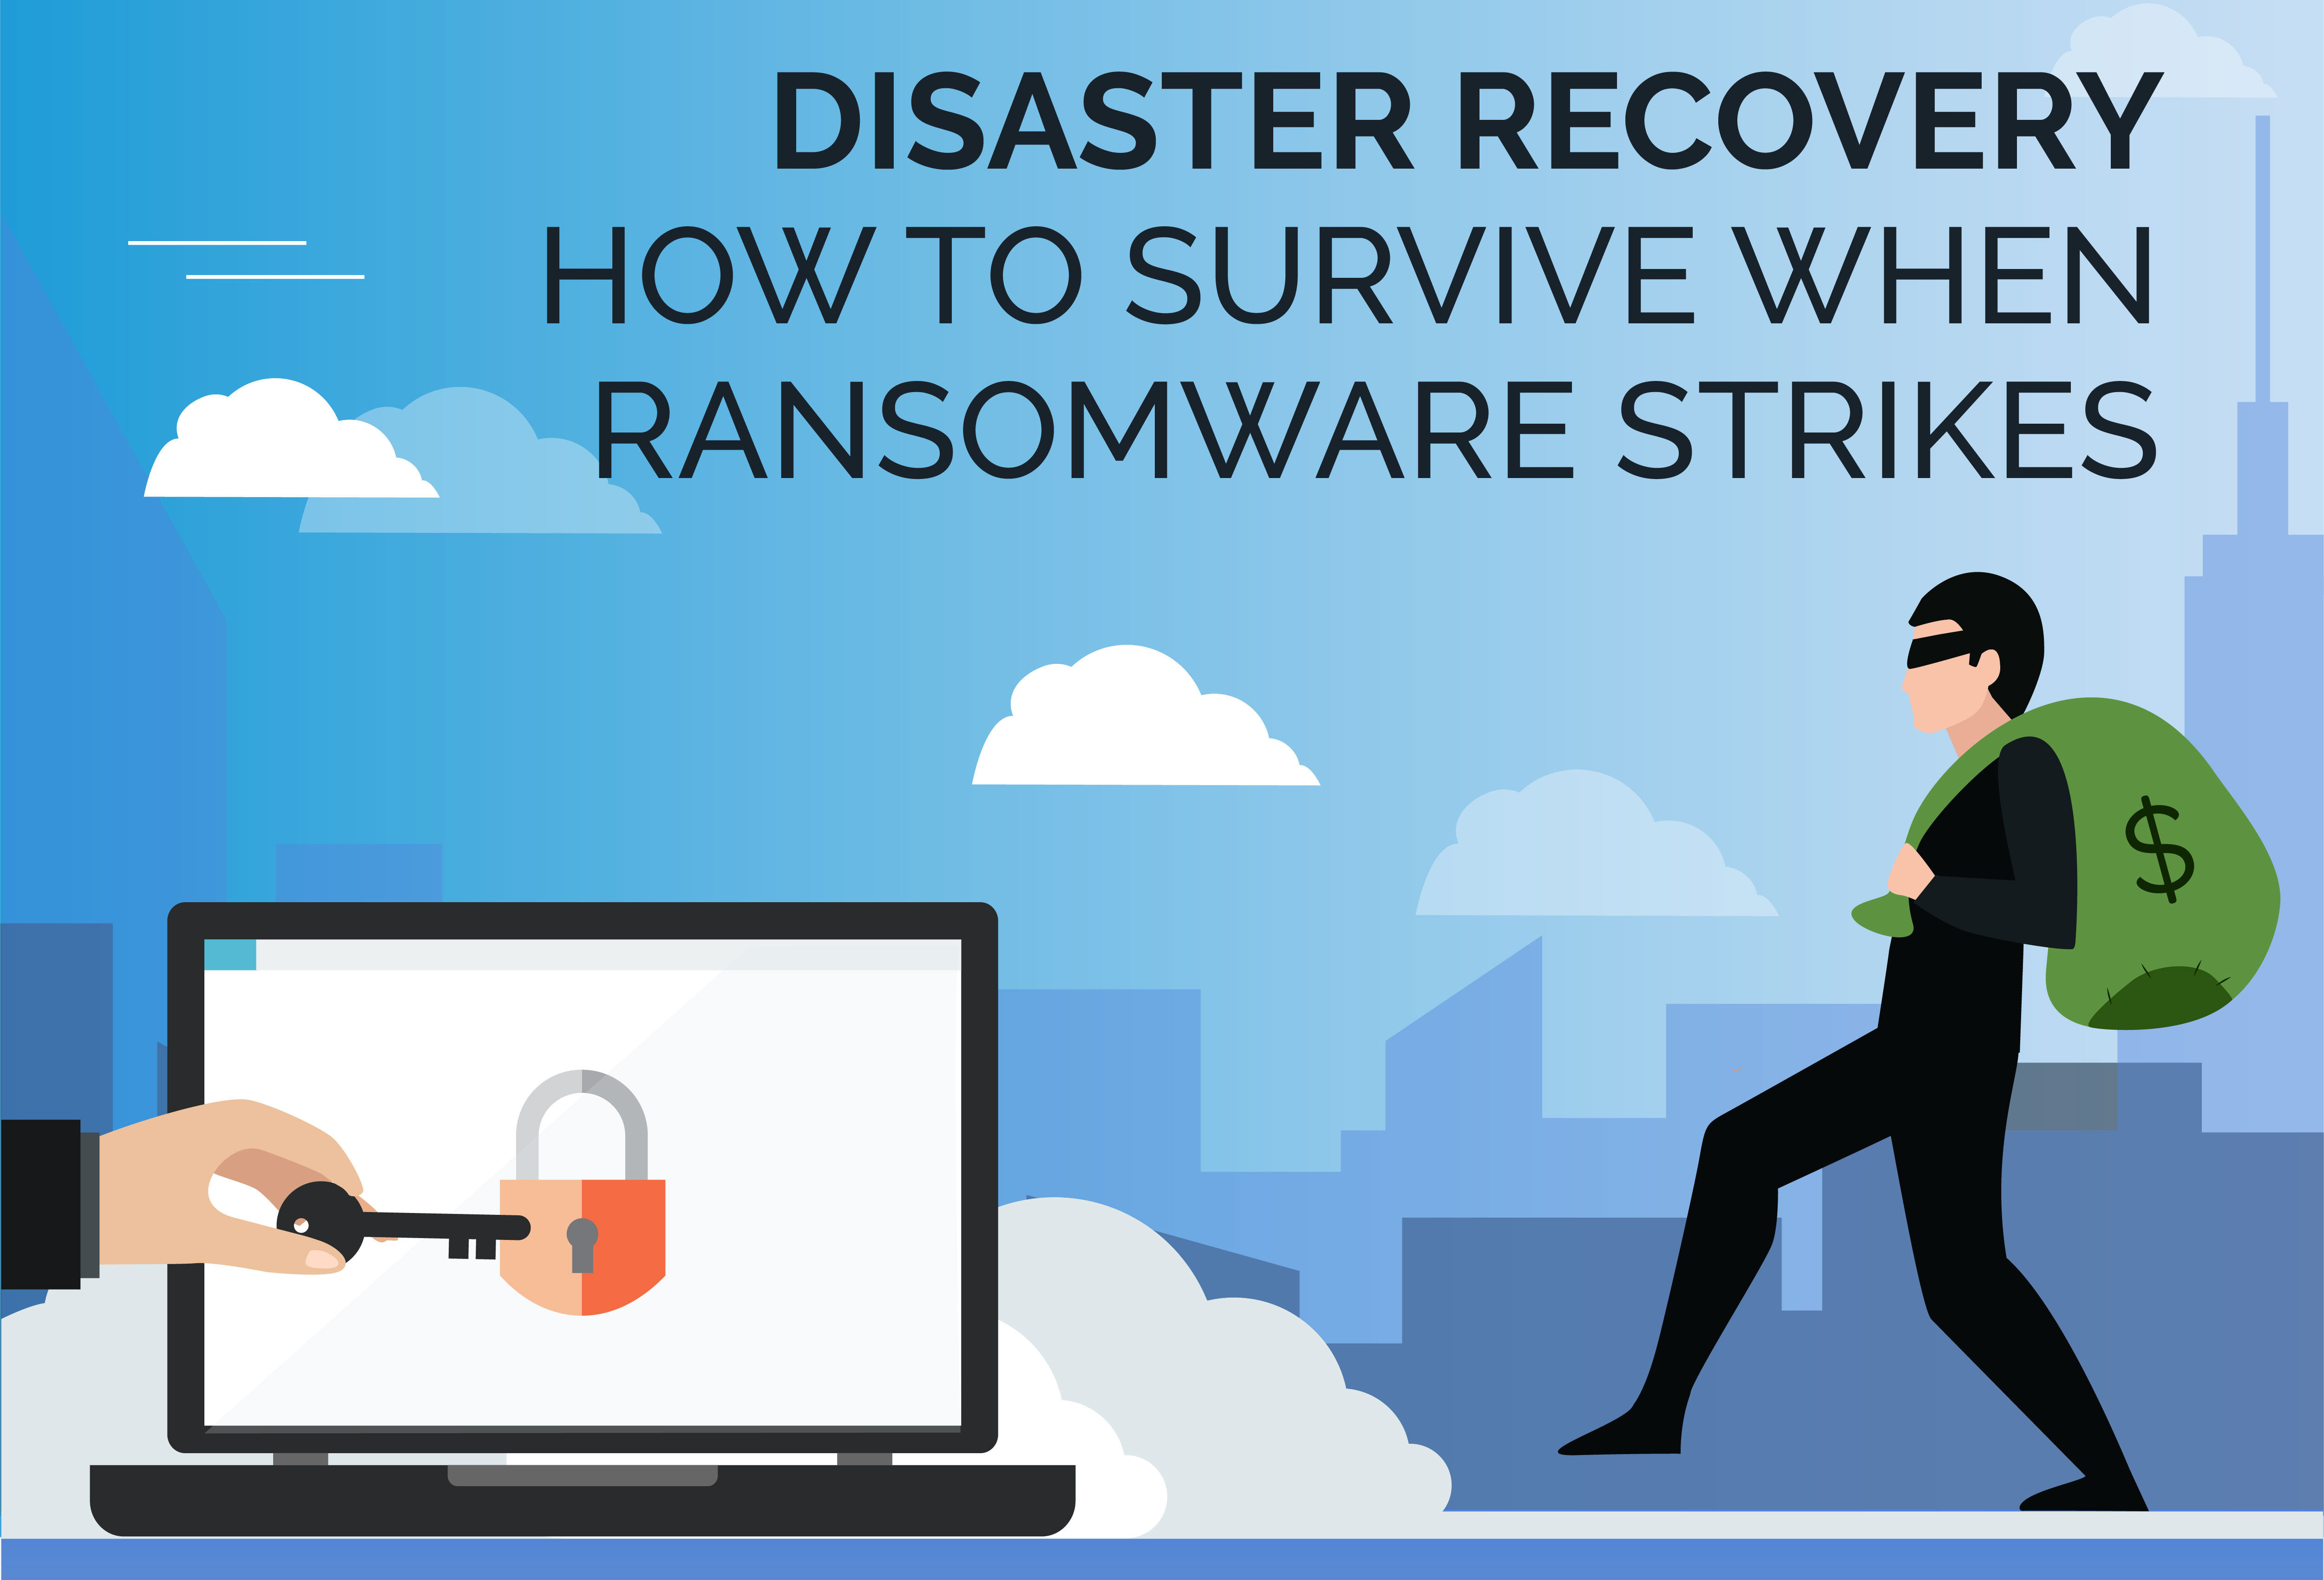 Infographic: Disaster Recovery How to Survive When Ransomware Strikes